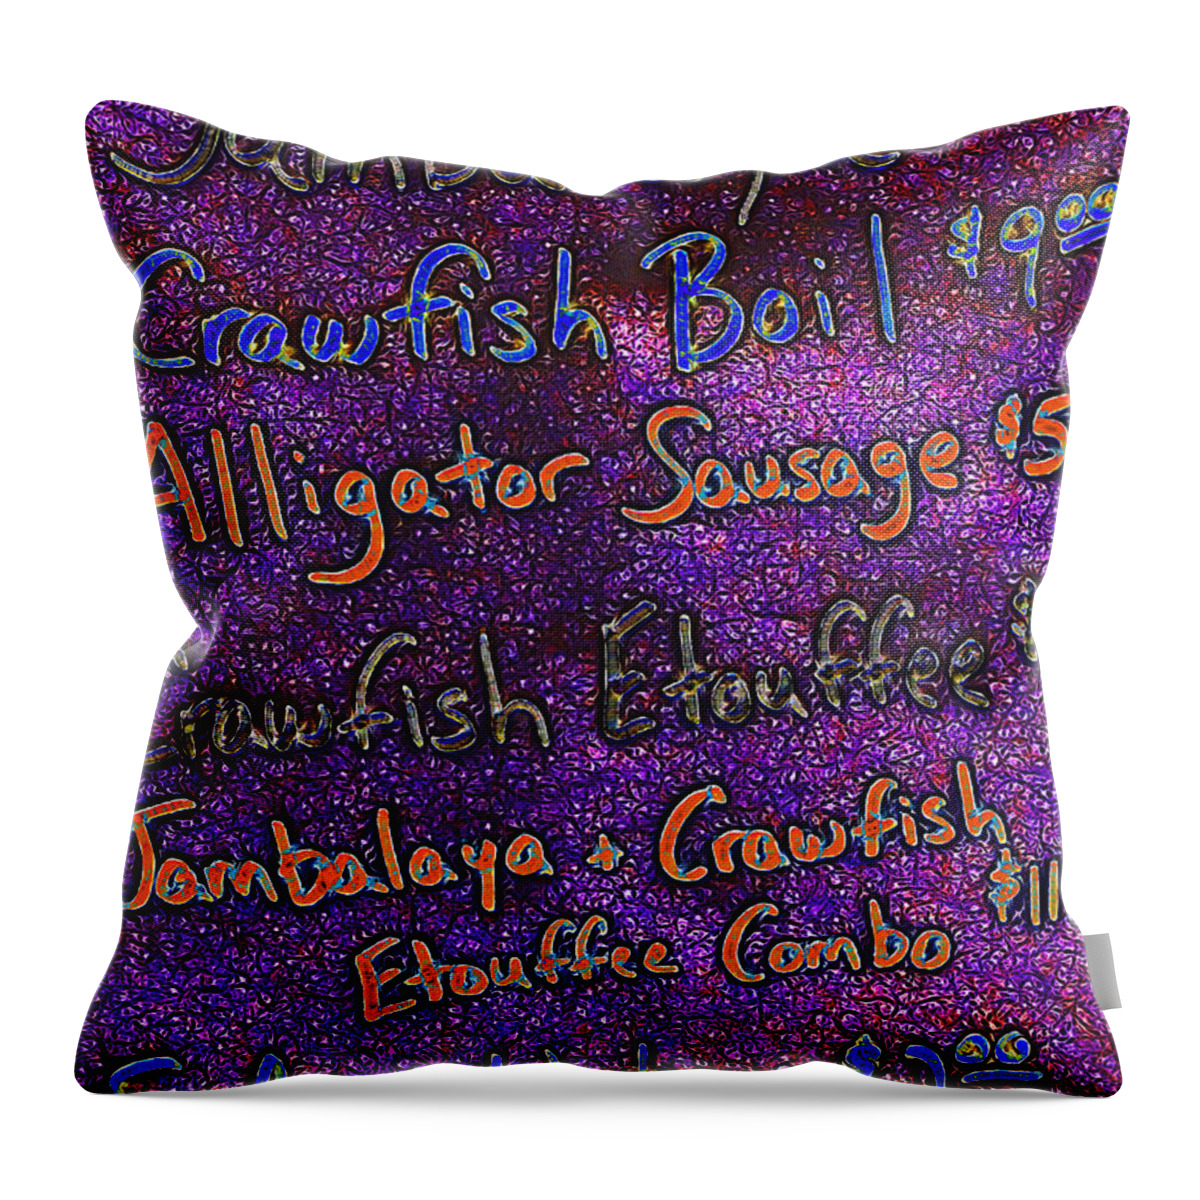 Menu Throw Pillow featuring the photograph Alligator Sausage For Five Dollars 20130610 by Wingsdomain Art and Photography